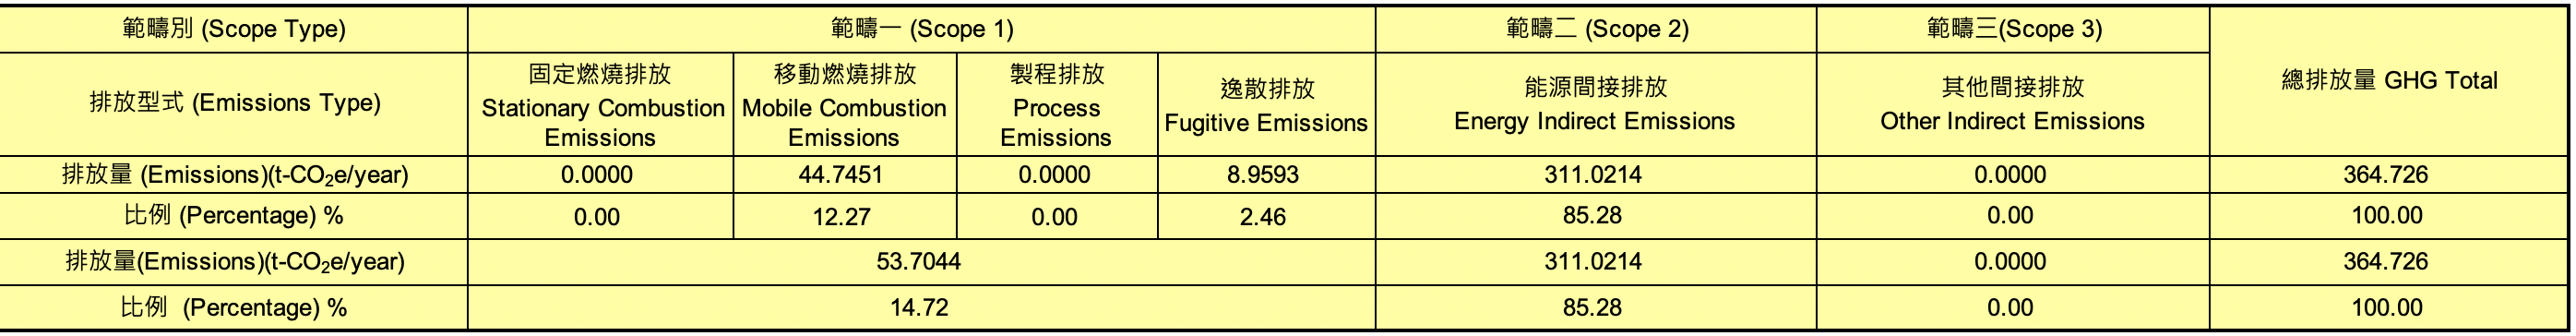 2021 scopes and emission types of greenhouse gas emissions